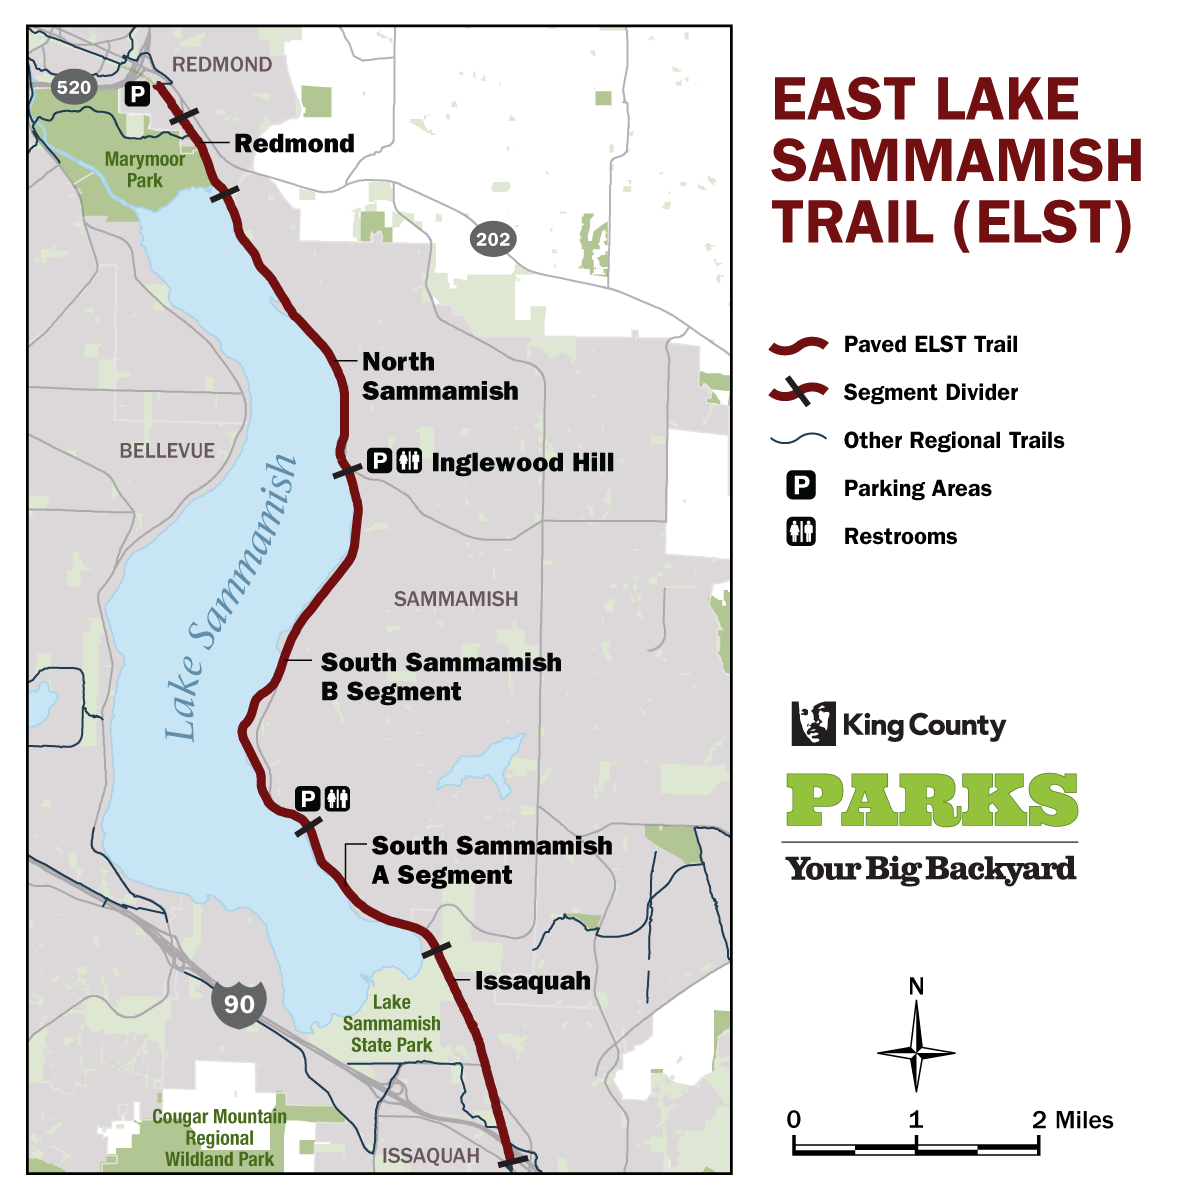 East Lake Sammamish Trail map showing parks, trail segments, parking and bathrooms